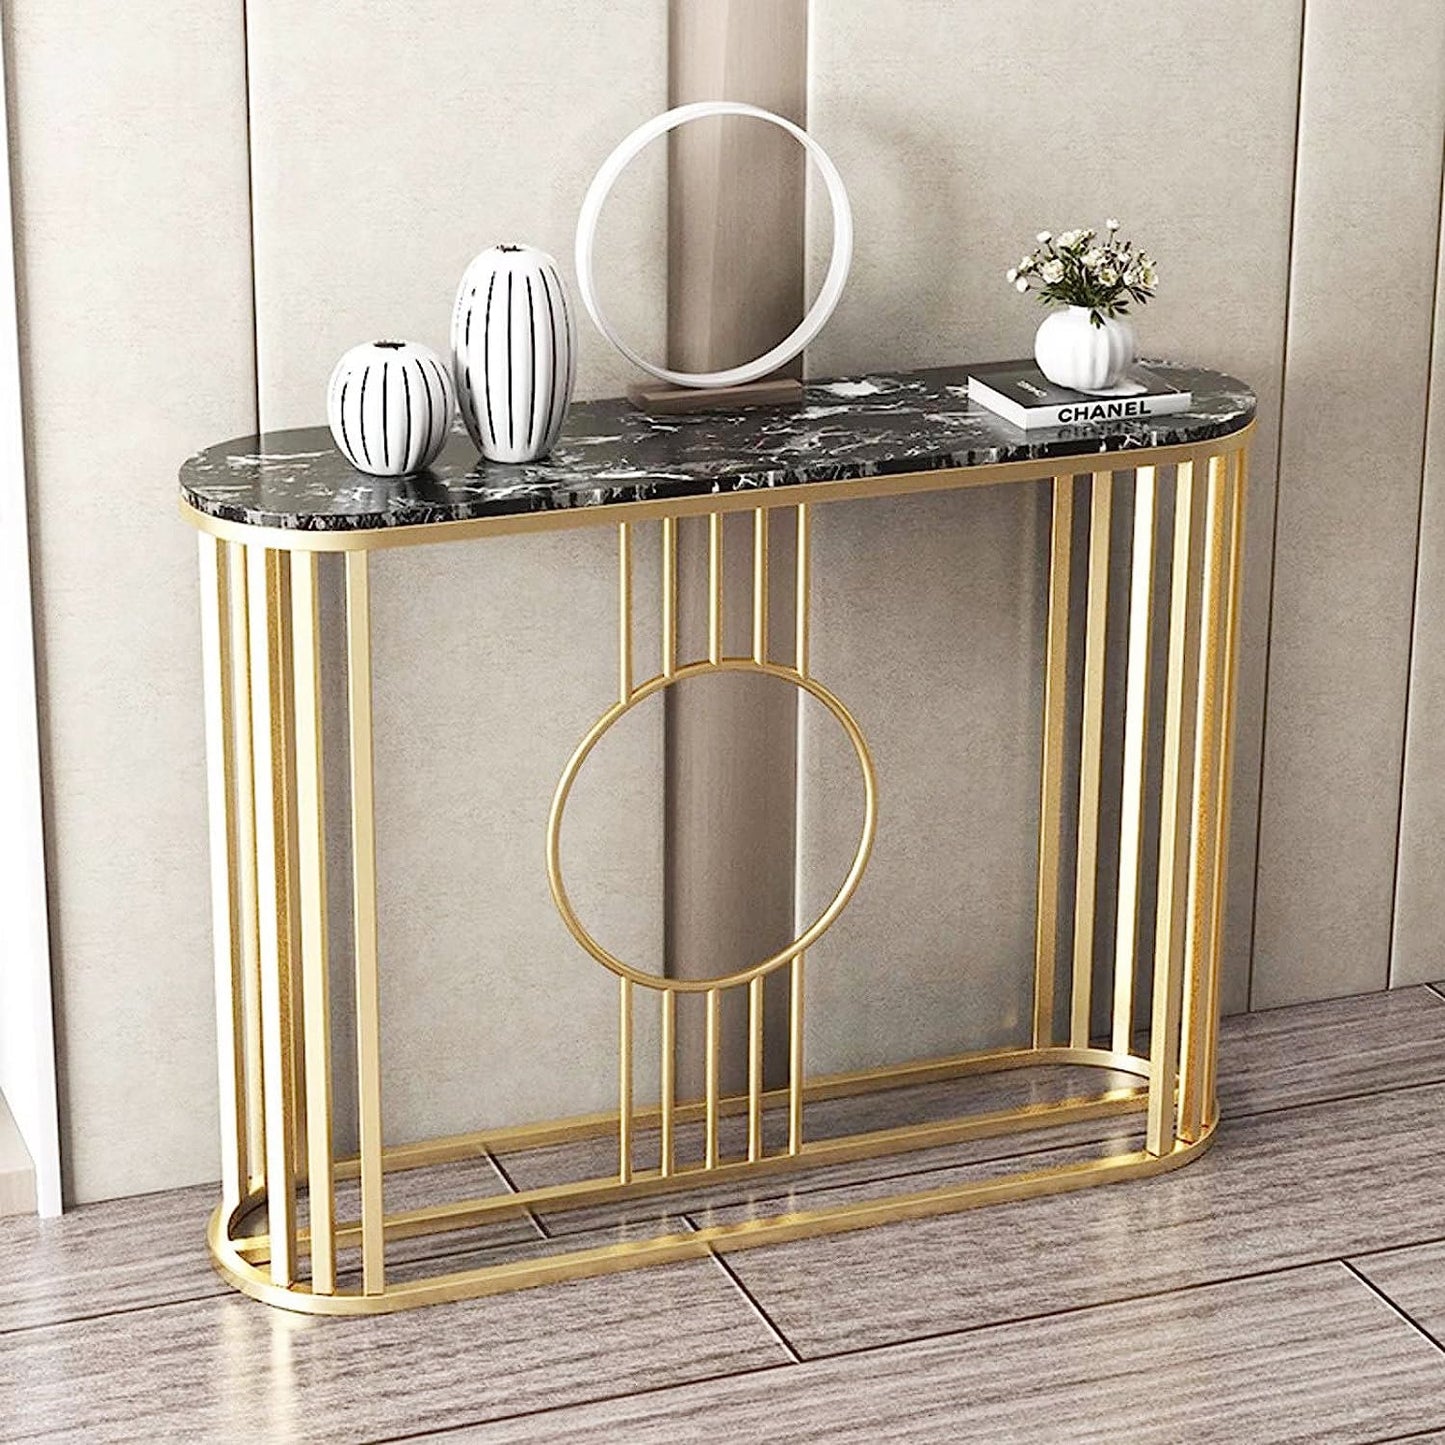 Narrow Console Table Metal Legs Hallway Storage Shelves For Entry